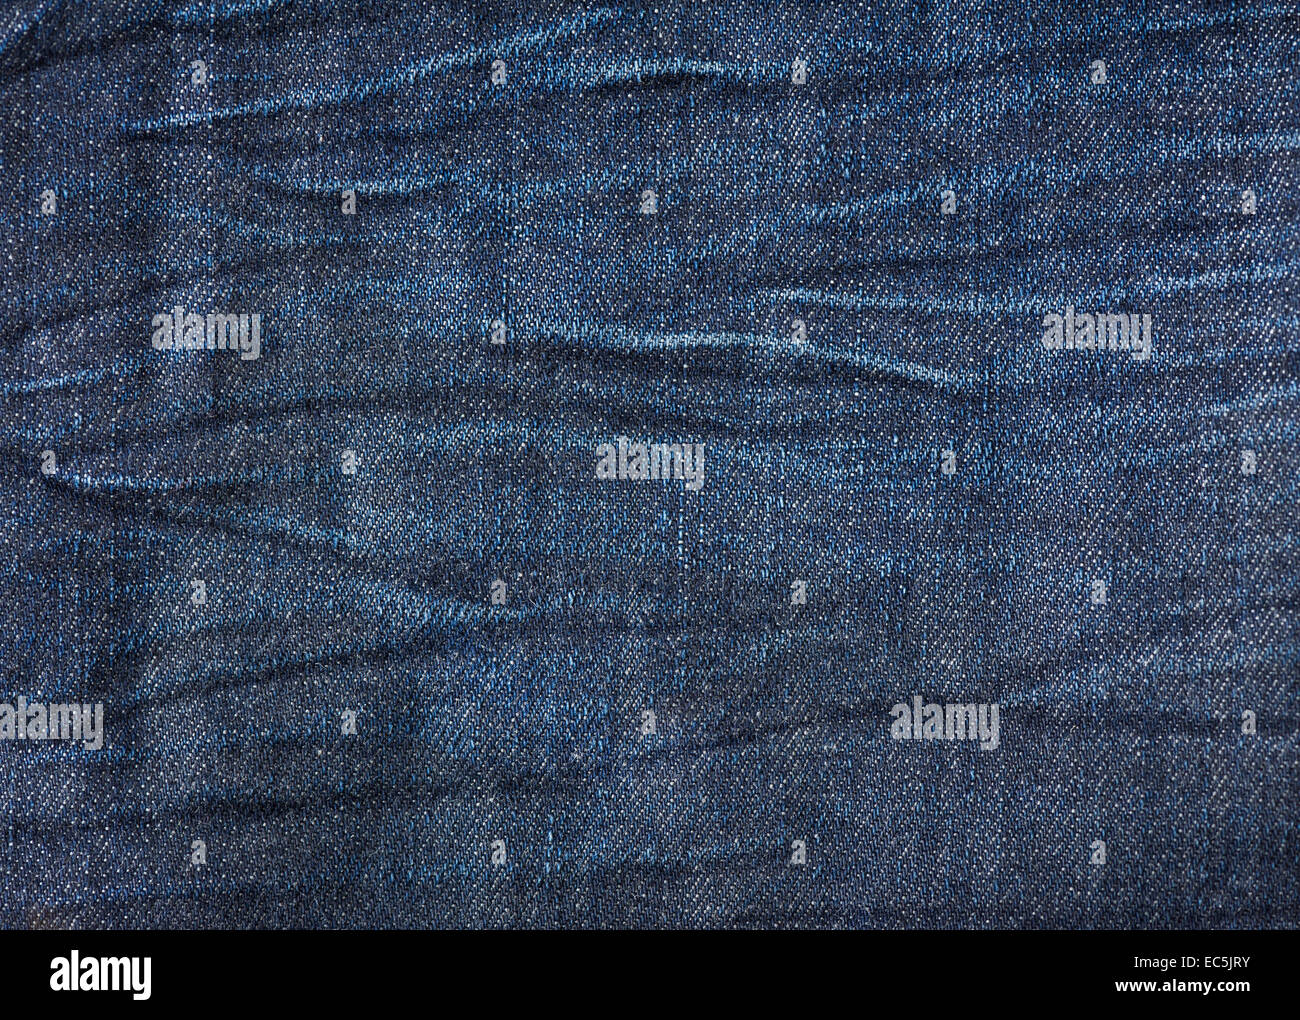 Navy blue jeans cloth textured pattern abstract Stock Photo